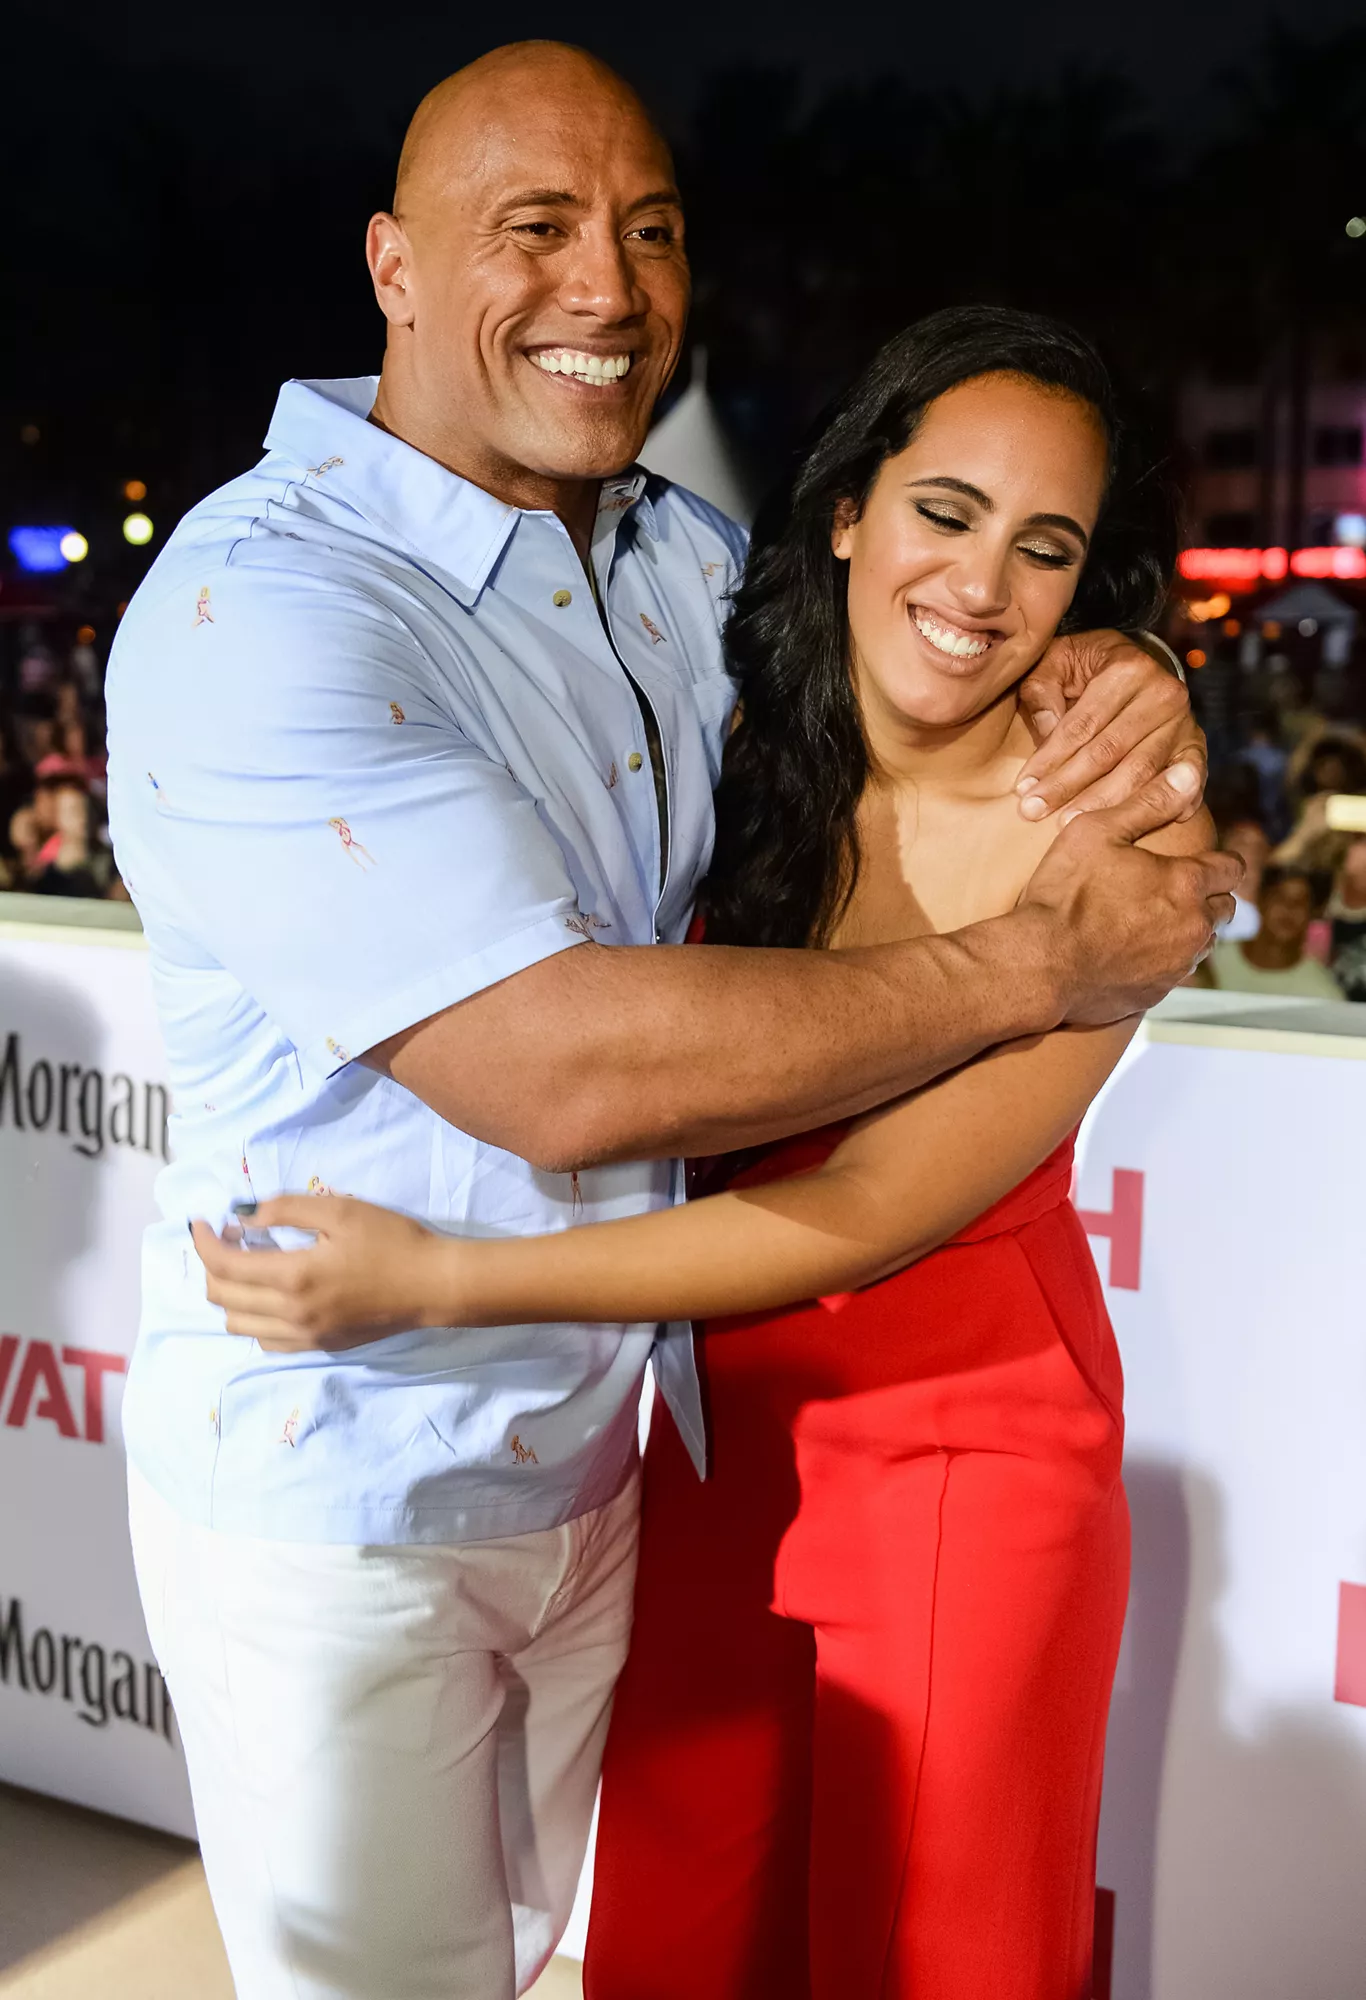 Dwayne Johnson and Simone Johnson attend Paramount Pictures' World Premiere of "Baywatch" on May 13, 2017 in Miami, Florida